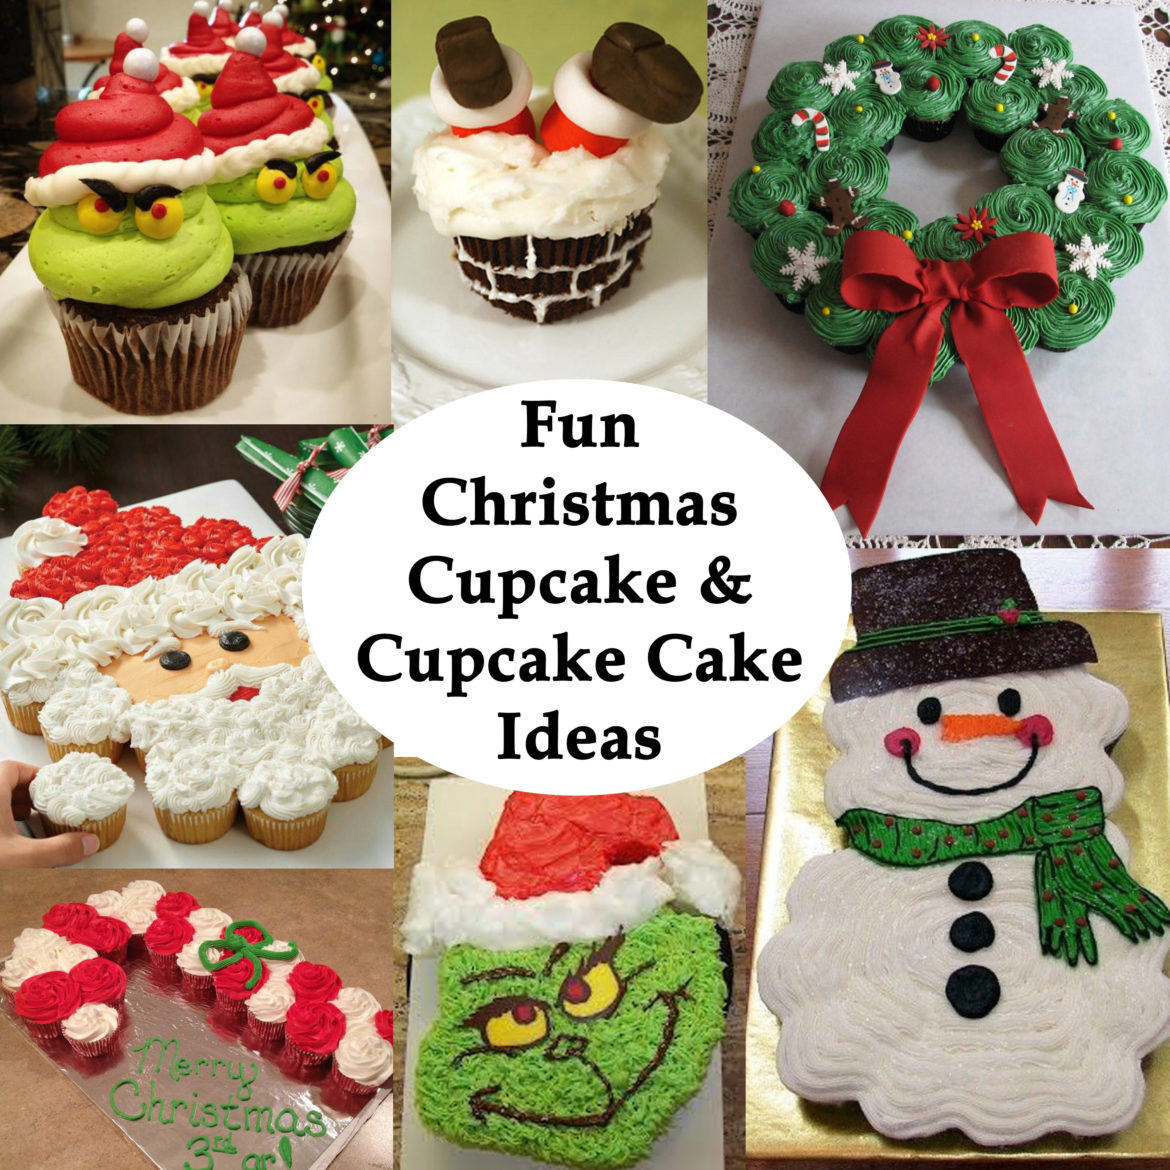 Edible Image Cake Decorating Solutions